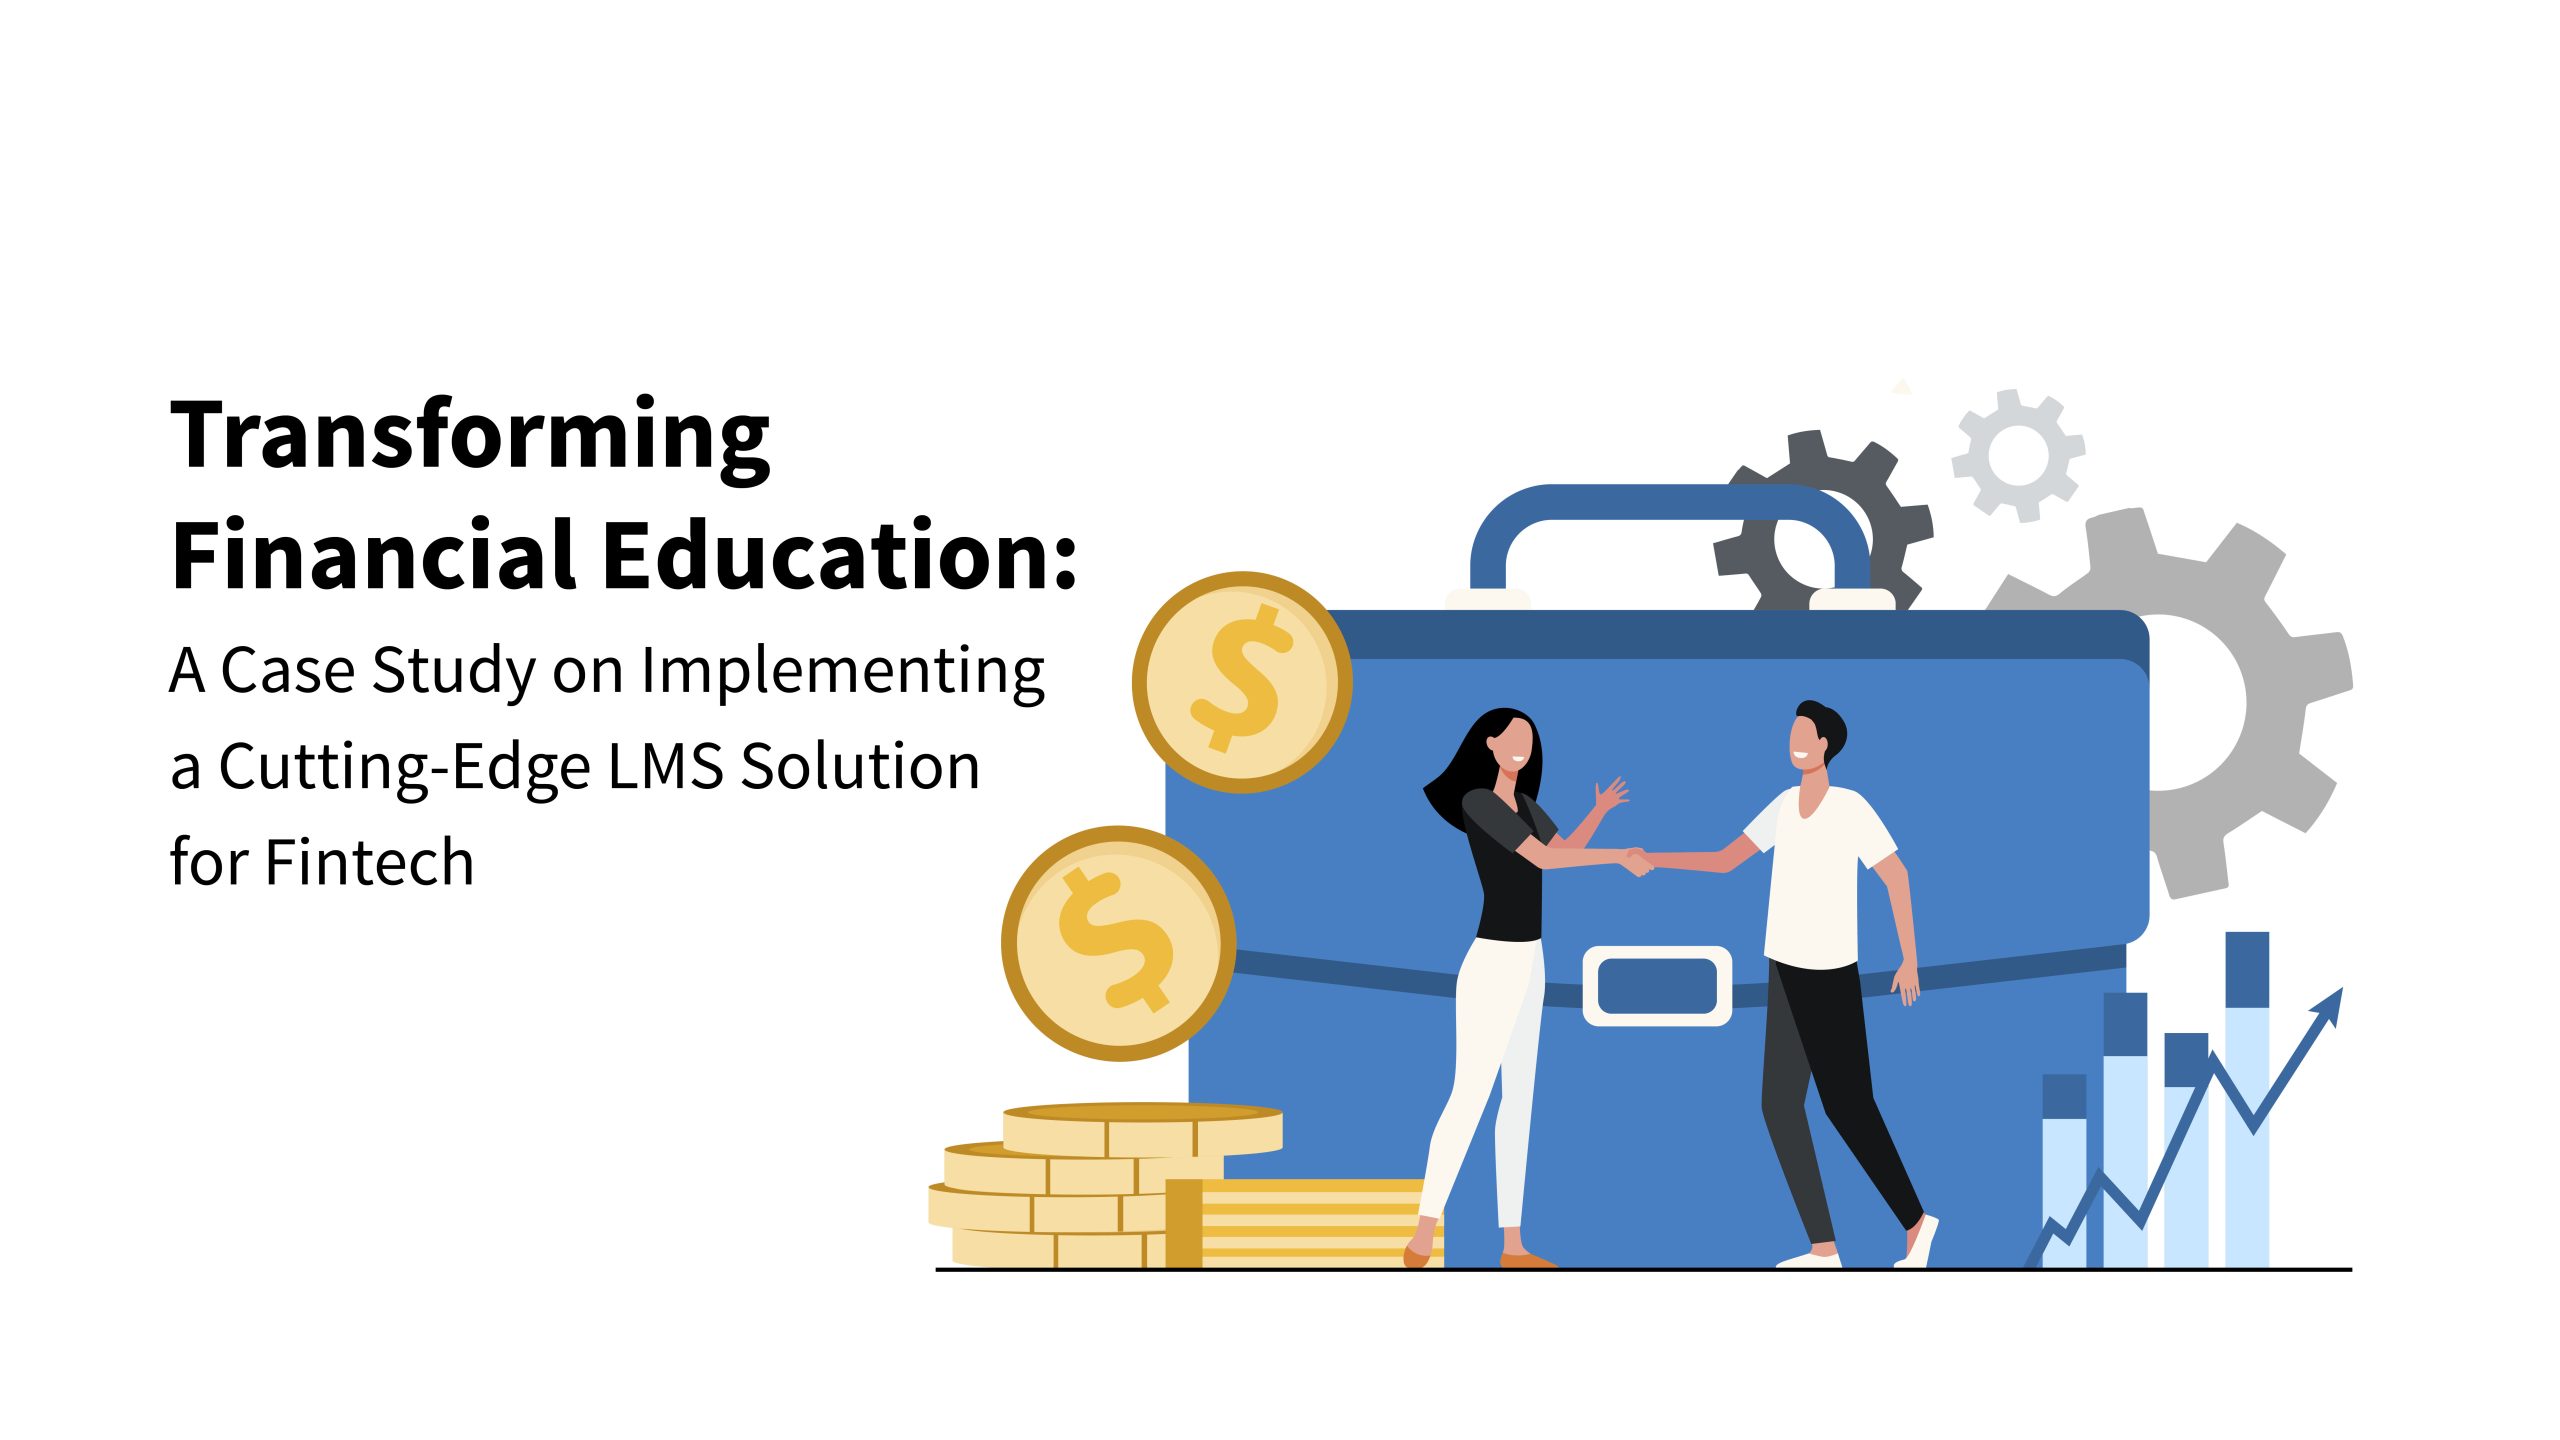 Transforming Financial Education: A Case Study on Implementing a Cutting-Edge LMS Solution for Fintech